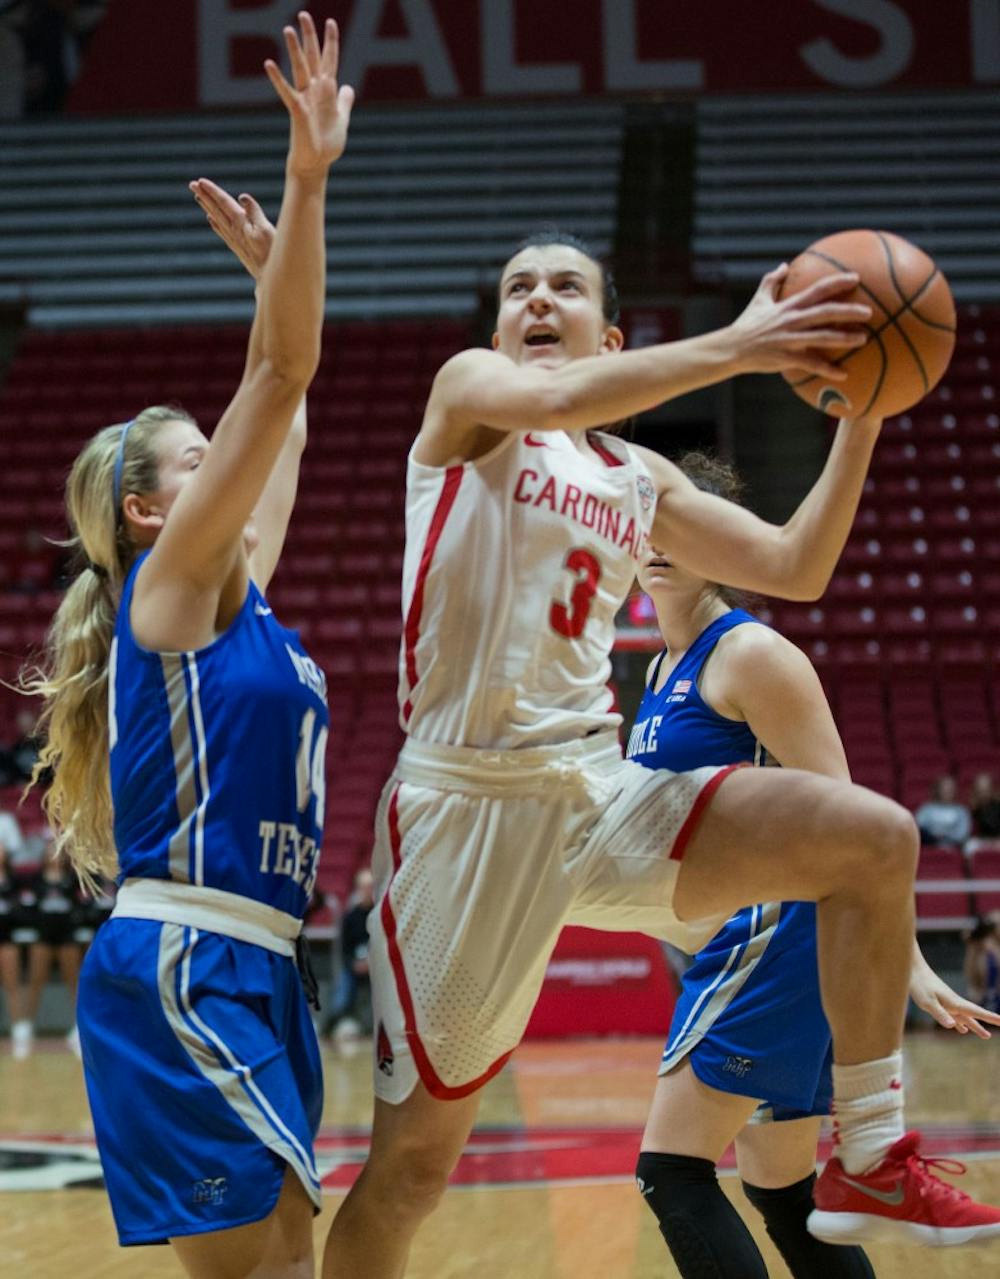 <p>Junior guard Carmen Grande goes for a lay-up in the game March 15 against Middle Tennessee in John E. Worthen Arena. <strong>Eric Pritchett, DN</strong></p>